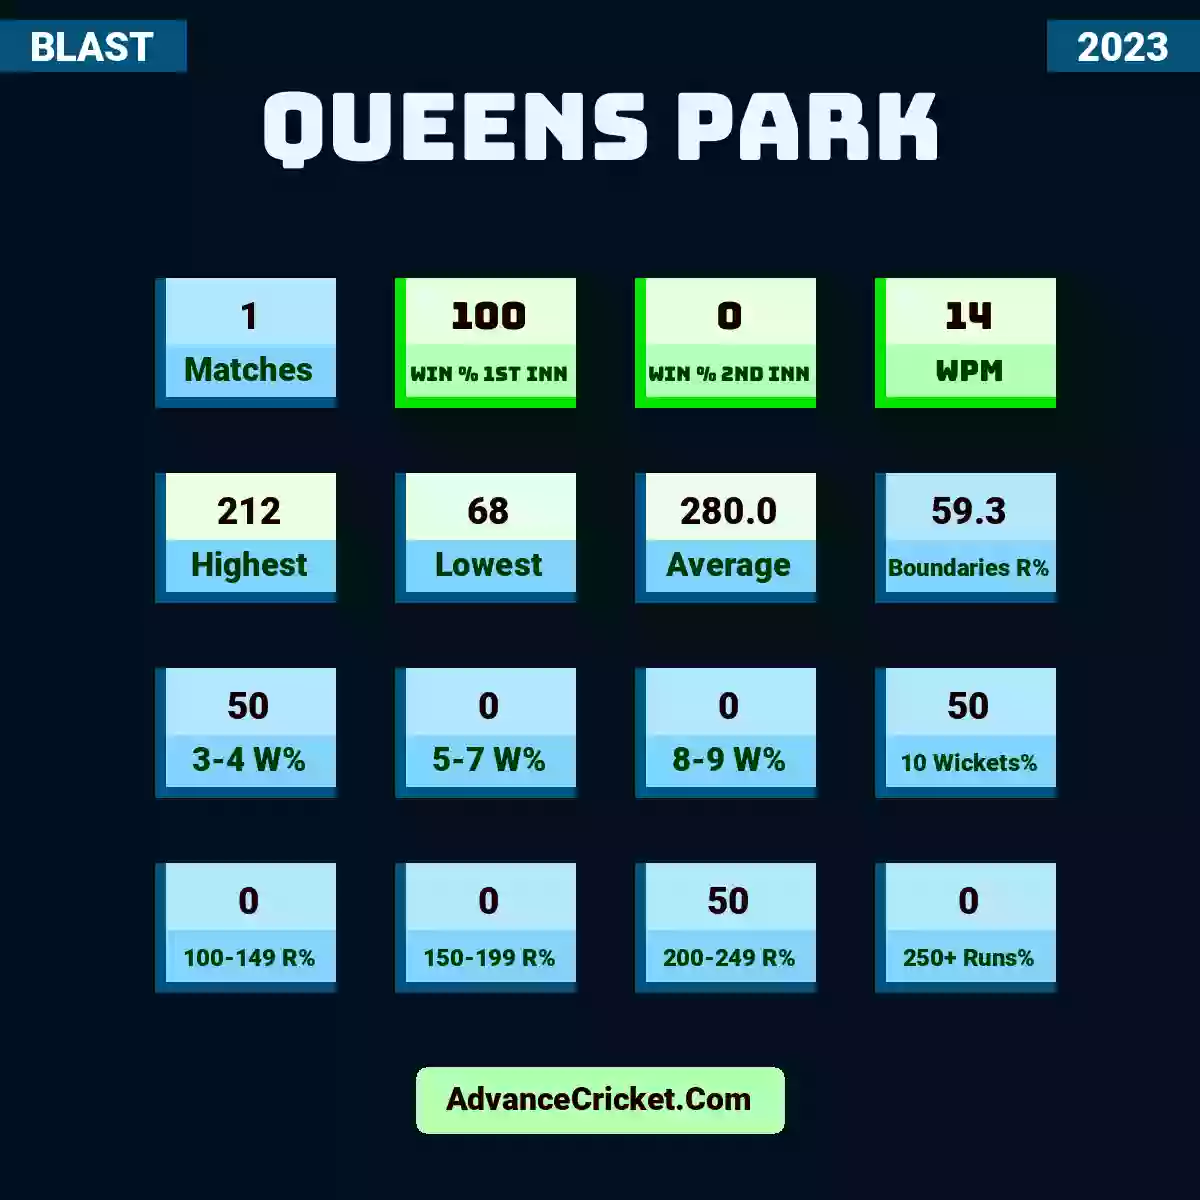 Image showing Queens Park with Matches: 1, Win % 1st Inn: 100, Win % 2nd Inn: 0, WPM: 14, Highest: 212, Lowest: 68, Average: 280.0, Boundaries R%: 59.3, 3-4 W%: 50, 5-7 W%: 0, 8-9 W%: 0, 10 Wickets%: 50, 100-149 R%: 0, 150-199 R%: 0, 200-249 R%: 50, 250+ Runs%: 0.